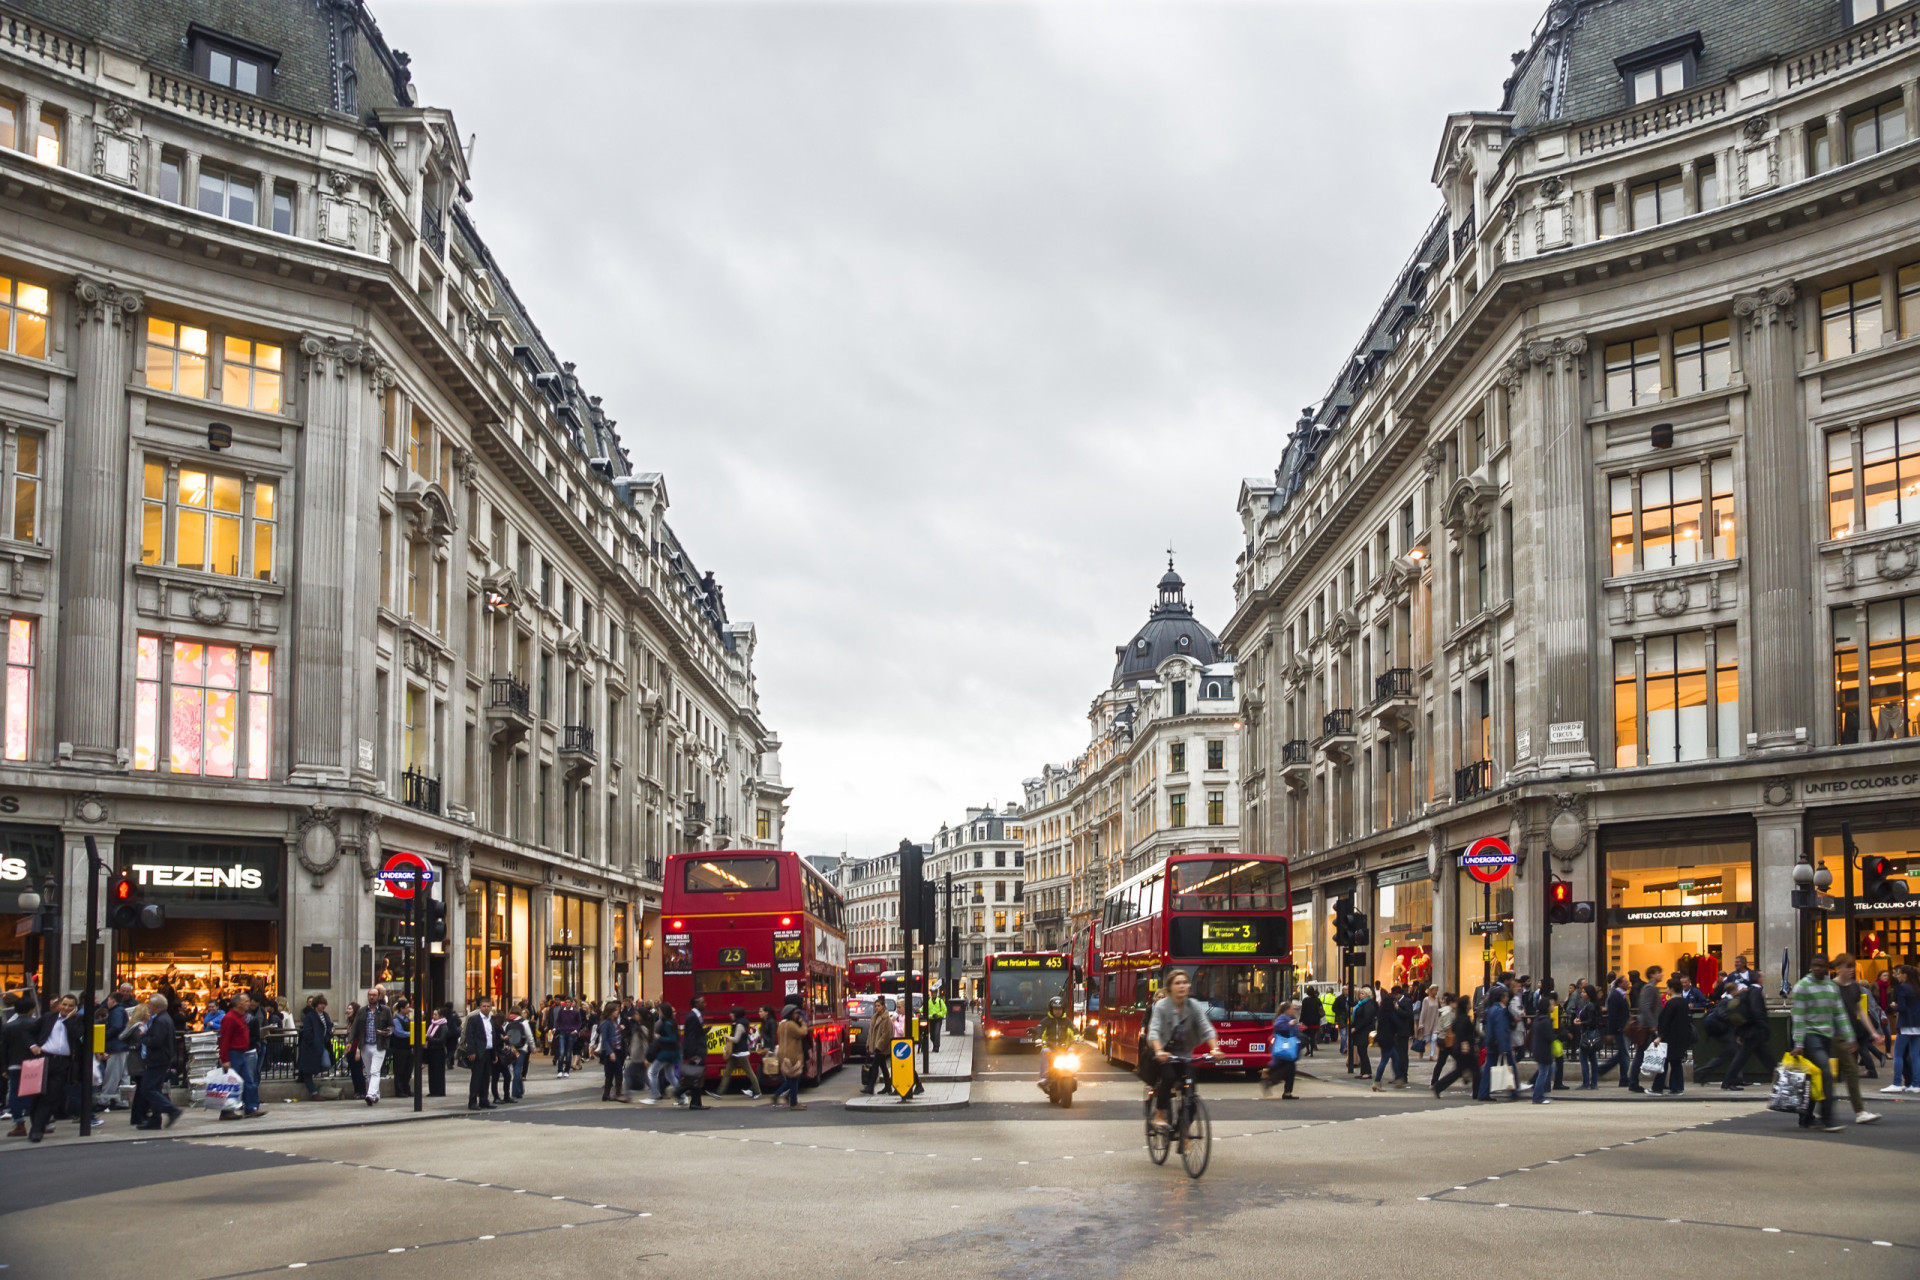 <p><span>Oxford Street, a popular shopping destination in Central London, is often targeted by thieves who ride mopeds and snatch phones from distracted tourists' hands.</span></p><p>You may also like:<a href="https://www.starsinsider.com/n/446410?utm_source=msn.com&utm_medium=display&utm_campaign=referral_description&utm_content=717448en-us"> Who are the richest royals in the world?</a></p>